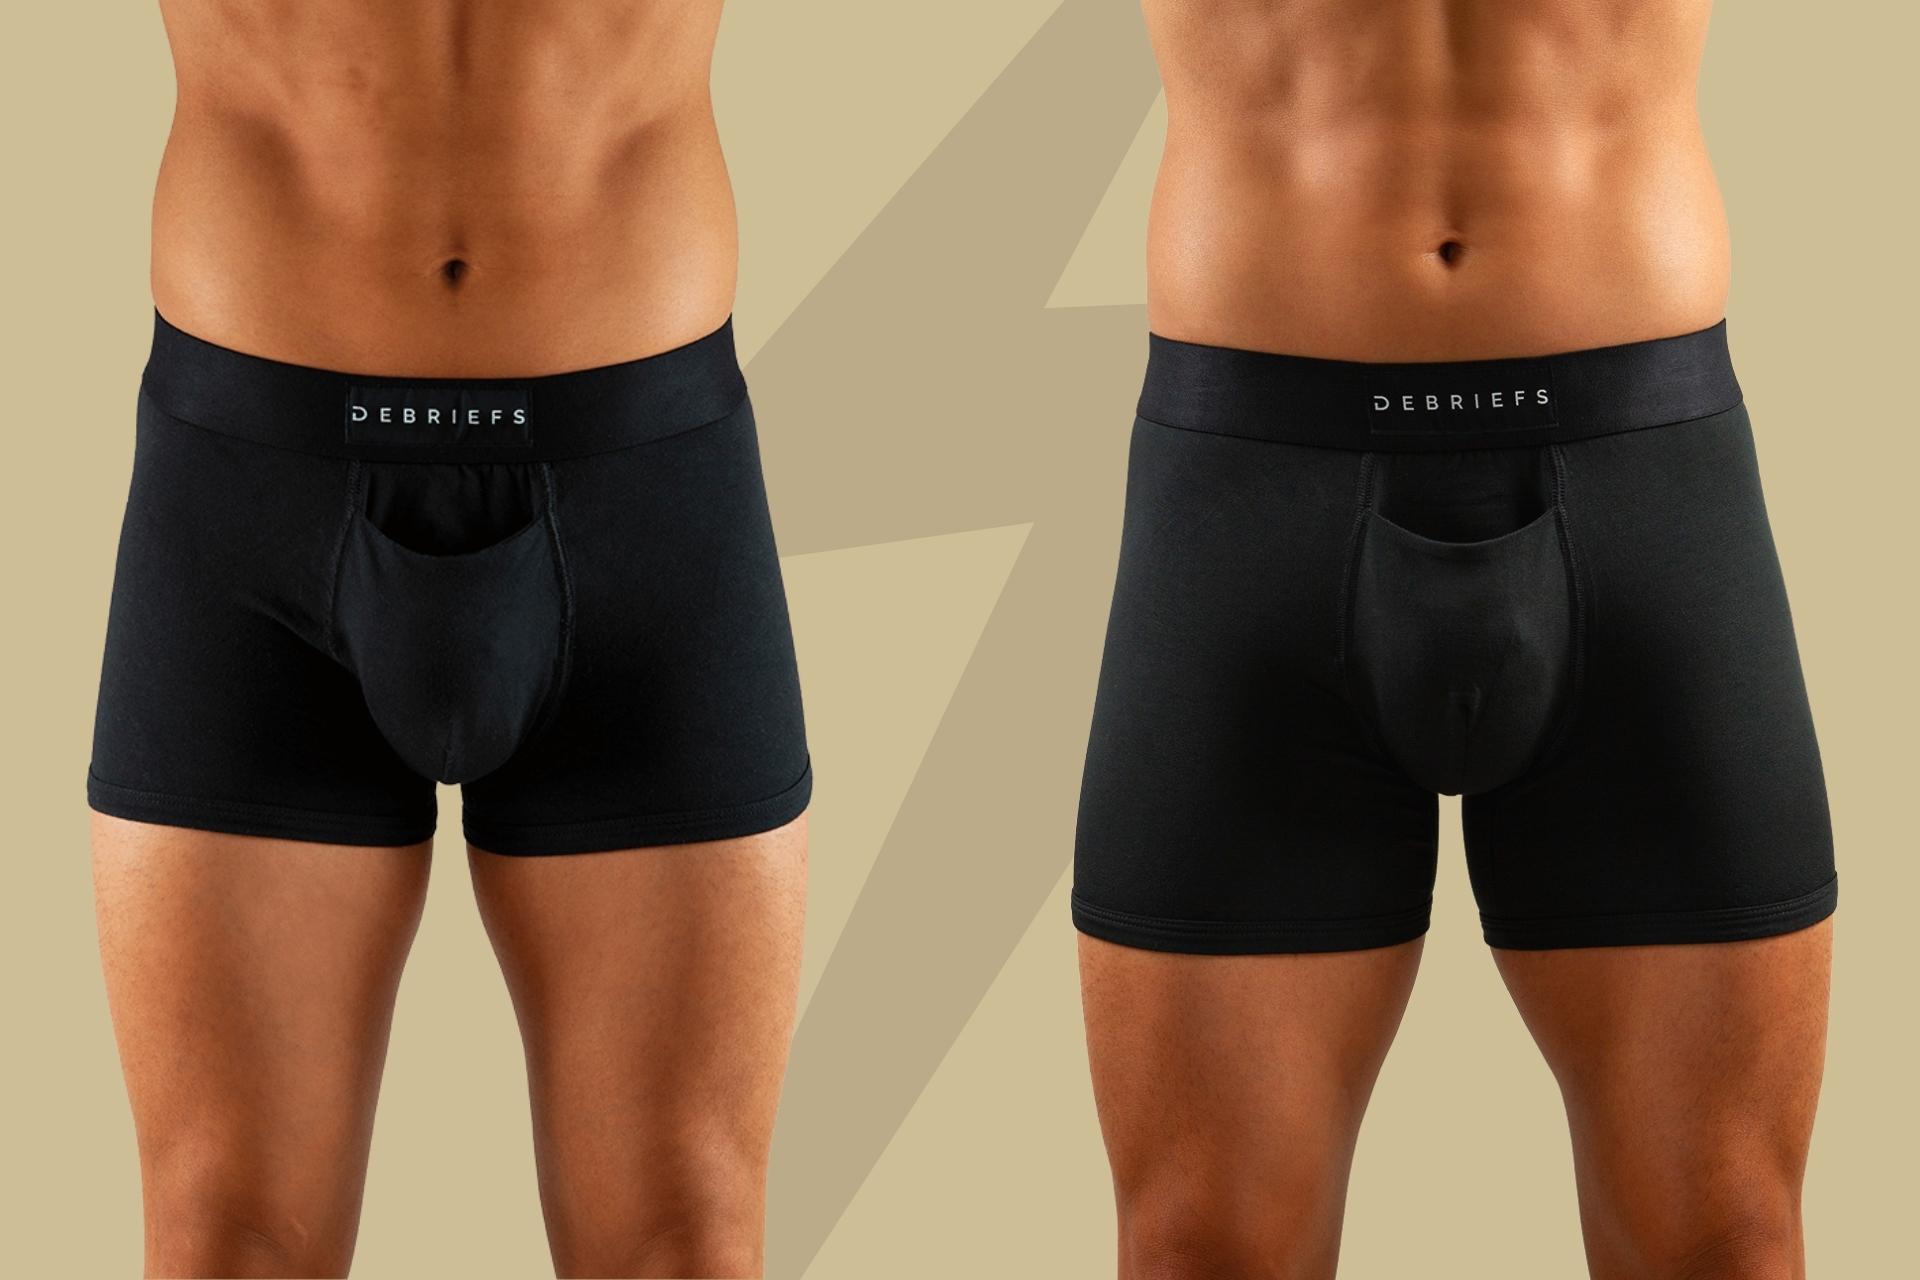 Trunks or Boxer Briefs: What’s the Difference?